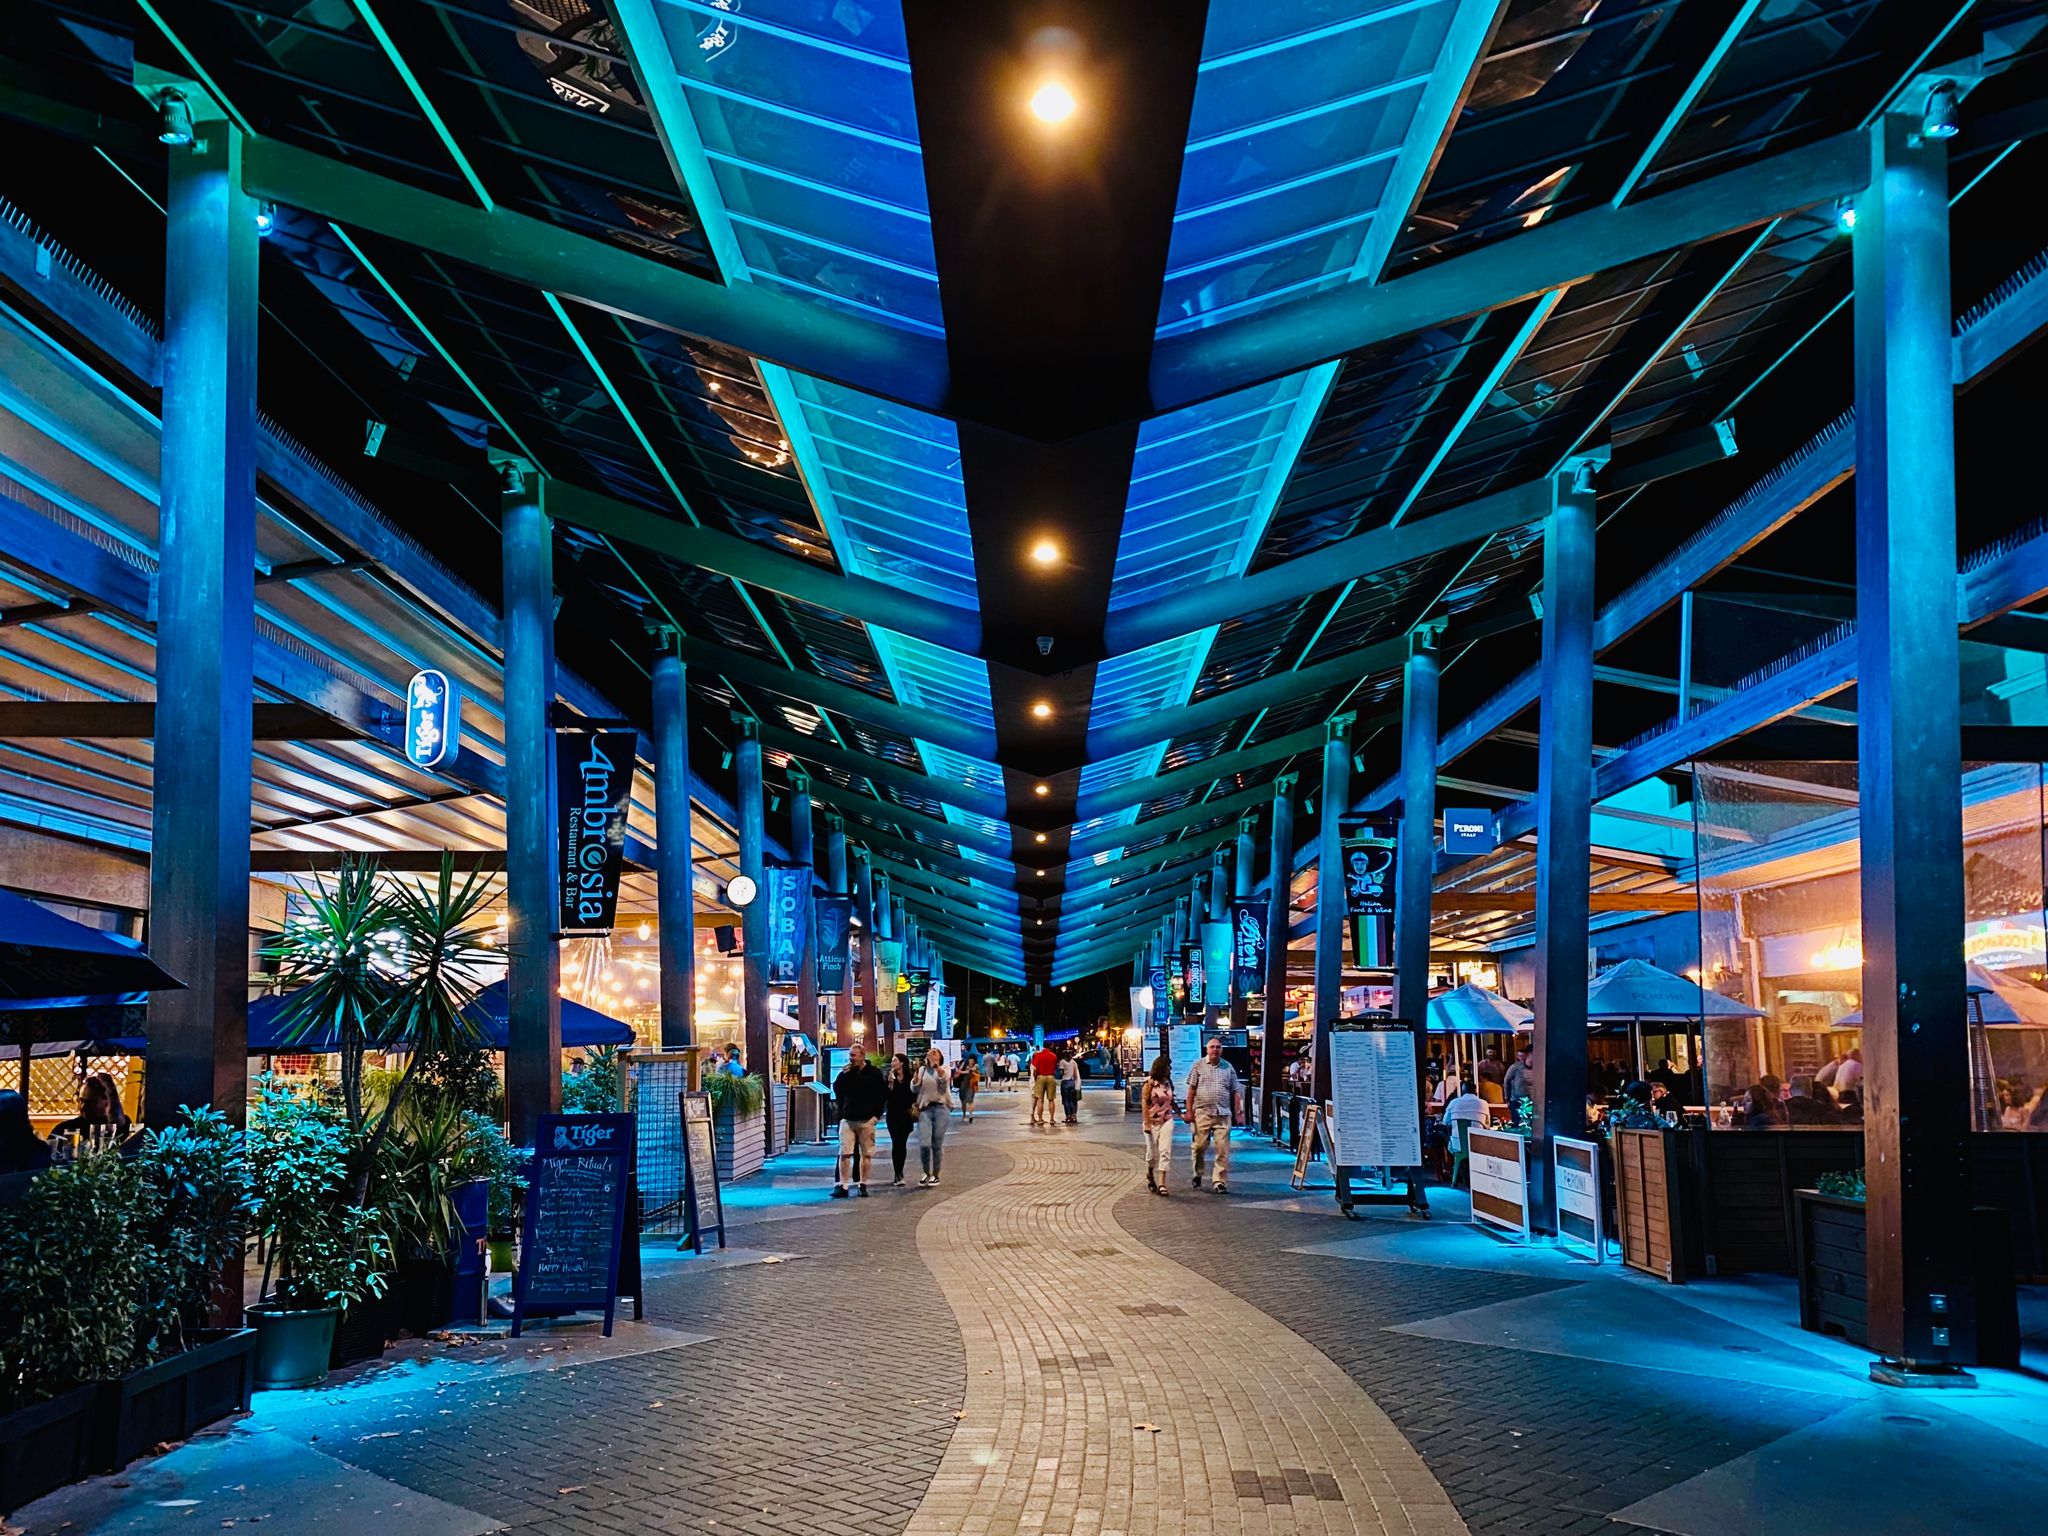 A night time photo looking down an pedestrian "street" with restaurants on either side and bright turquoise lighting along the ceiling/roof area.